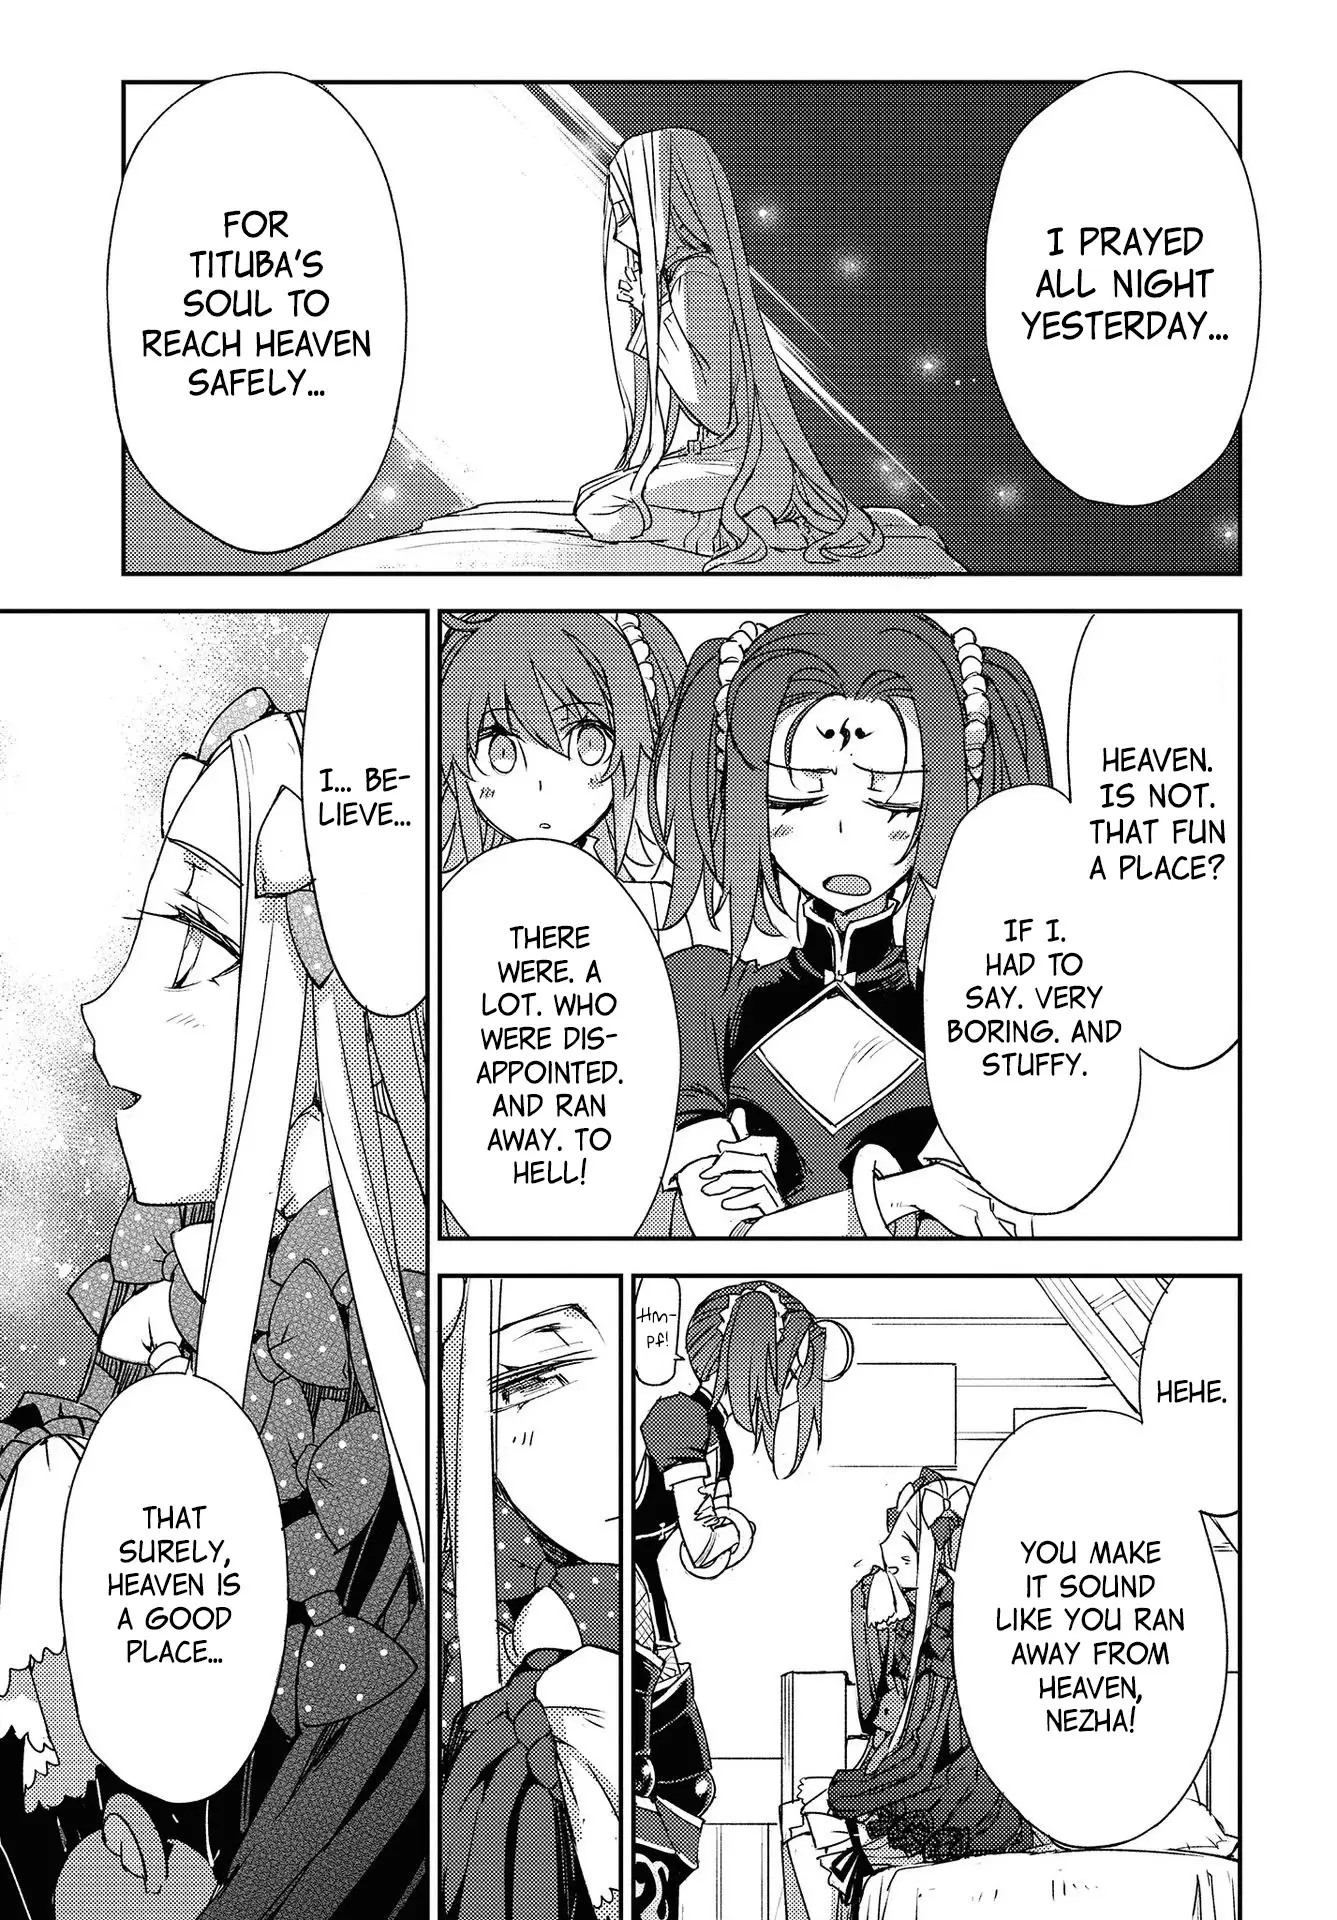 Fate/grand Order: Epic Of Remnant - Subspecies Singularity Iv: Taboo Advent Salem: Salem Of Heresy - 20 page 17-2feda848